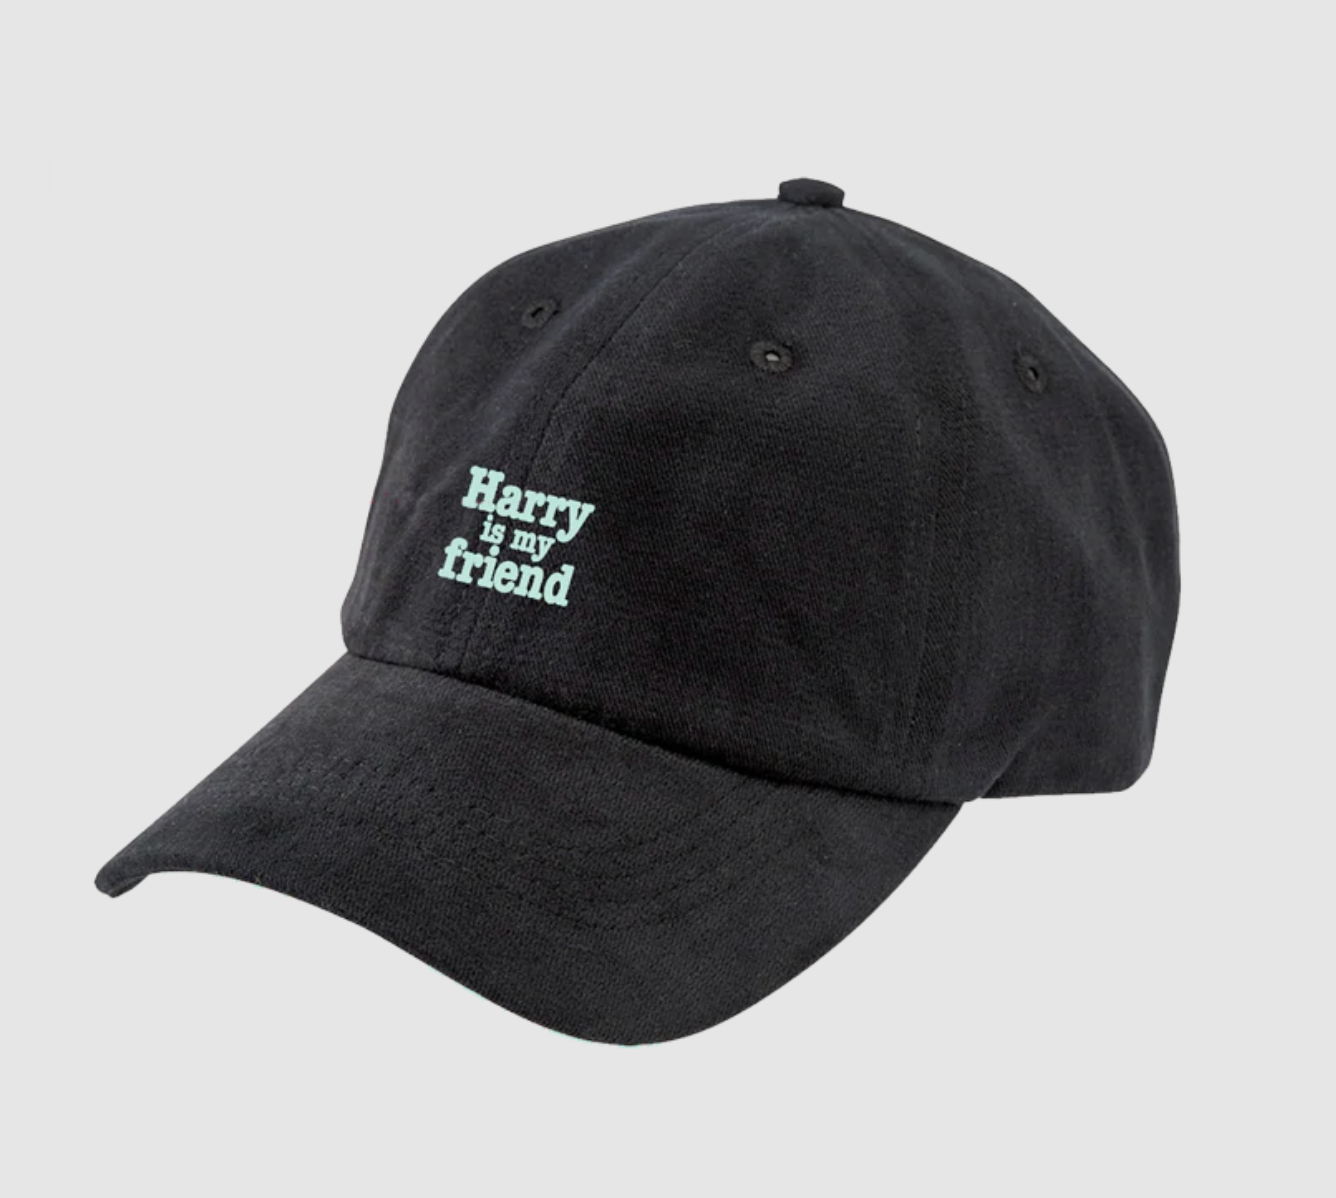 black hat with light blue text on it that reads 